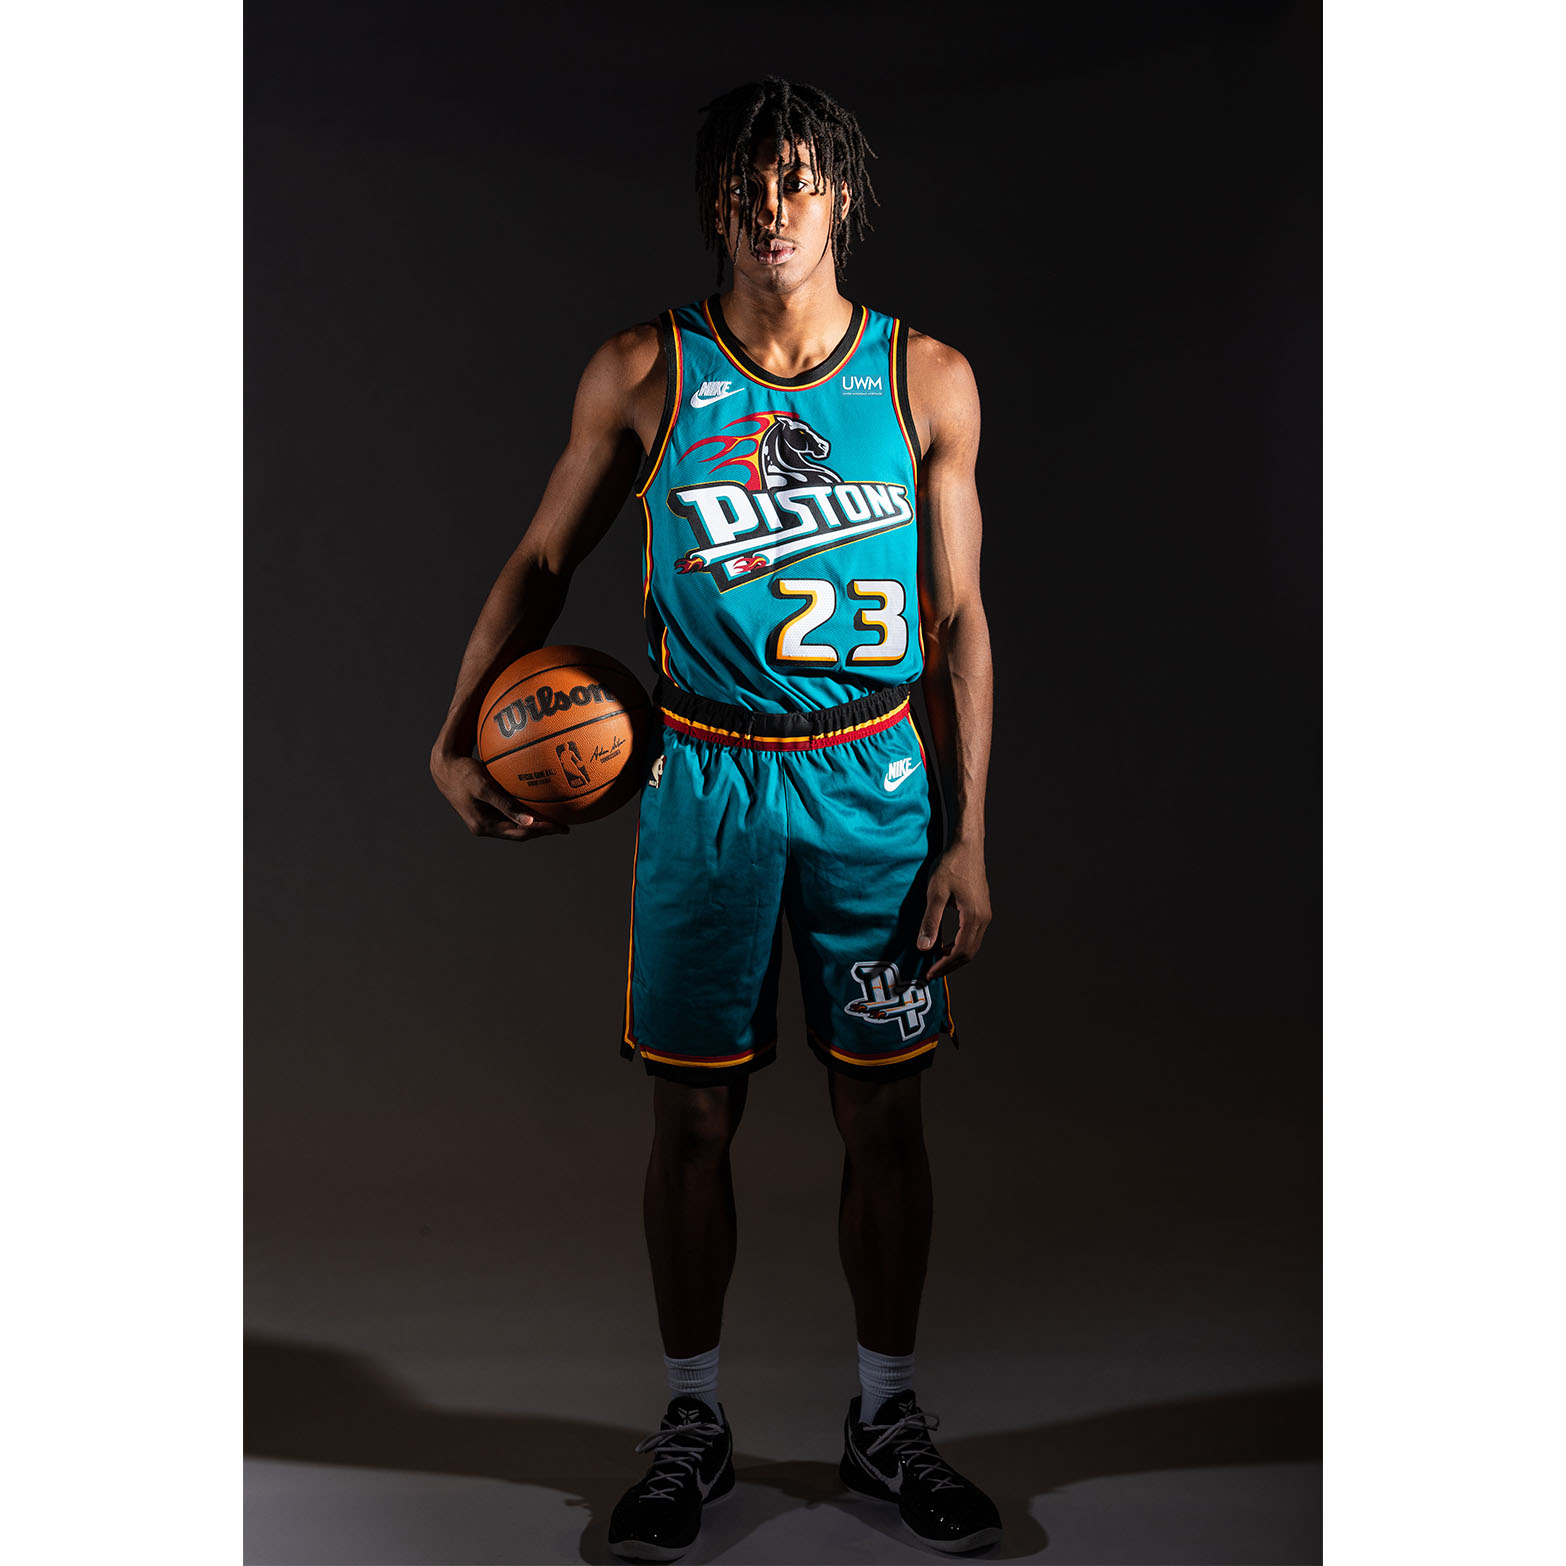 Pistons bring back classic teal jerseys from '90s